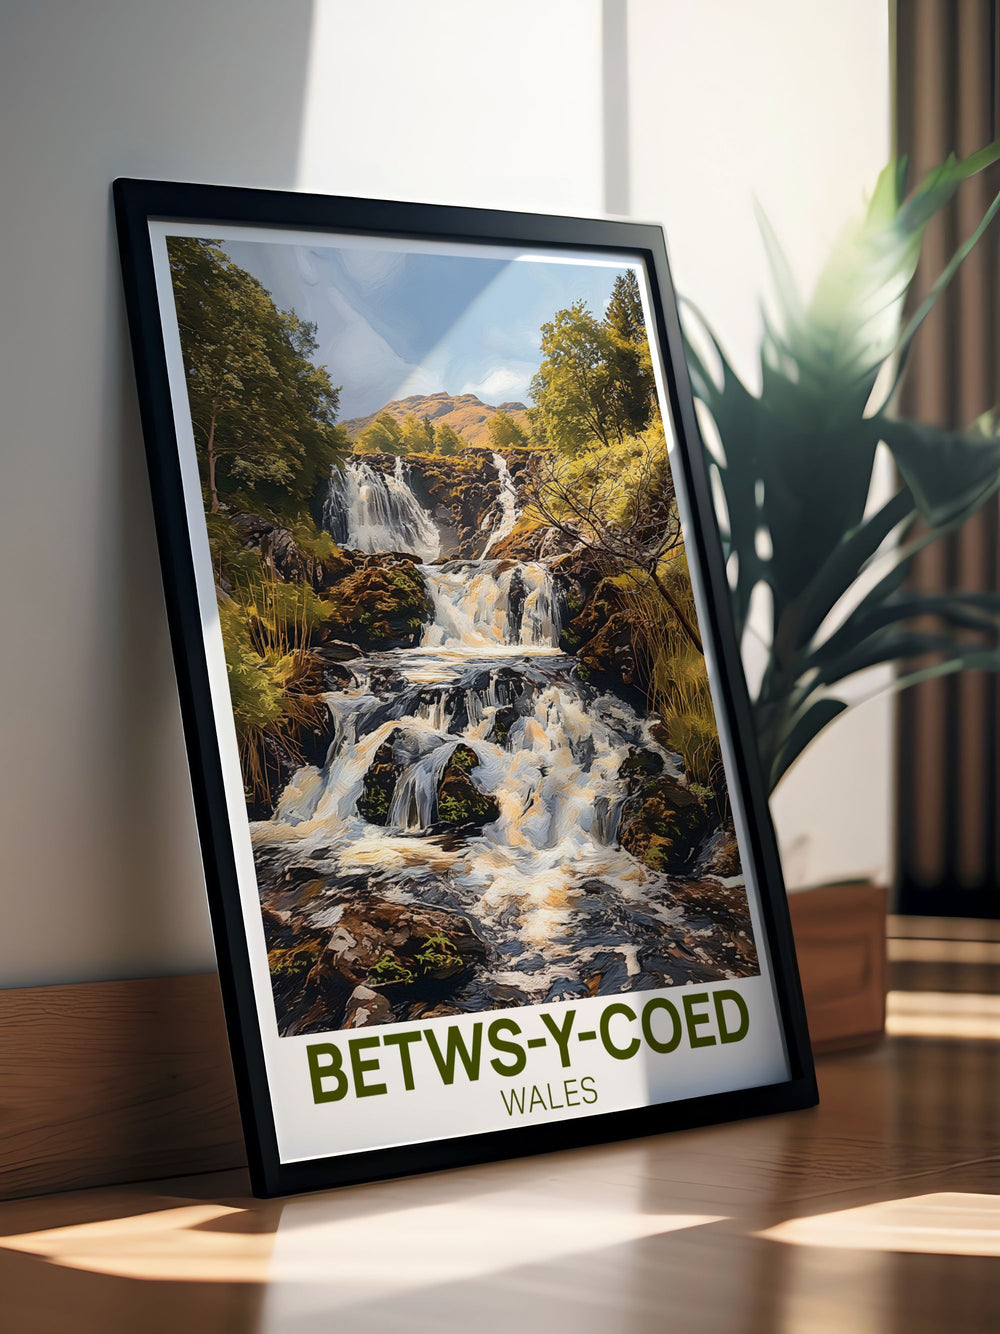 Beautiful Betws y Coed print showcasing the serene landscapes and iconic stone bridges of this Welsh village ideal for bringing a sense of tranquility to any living space Swallow Falls adds a touch of natural splendor to the piece.